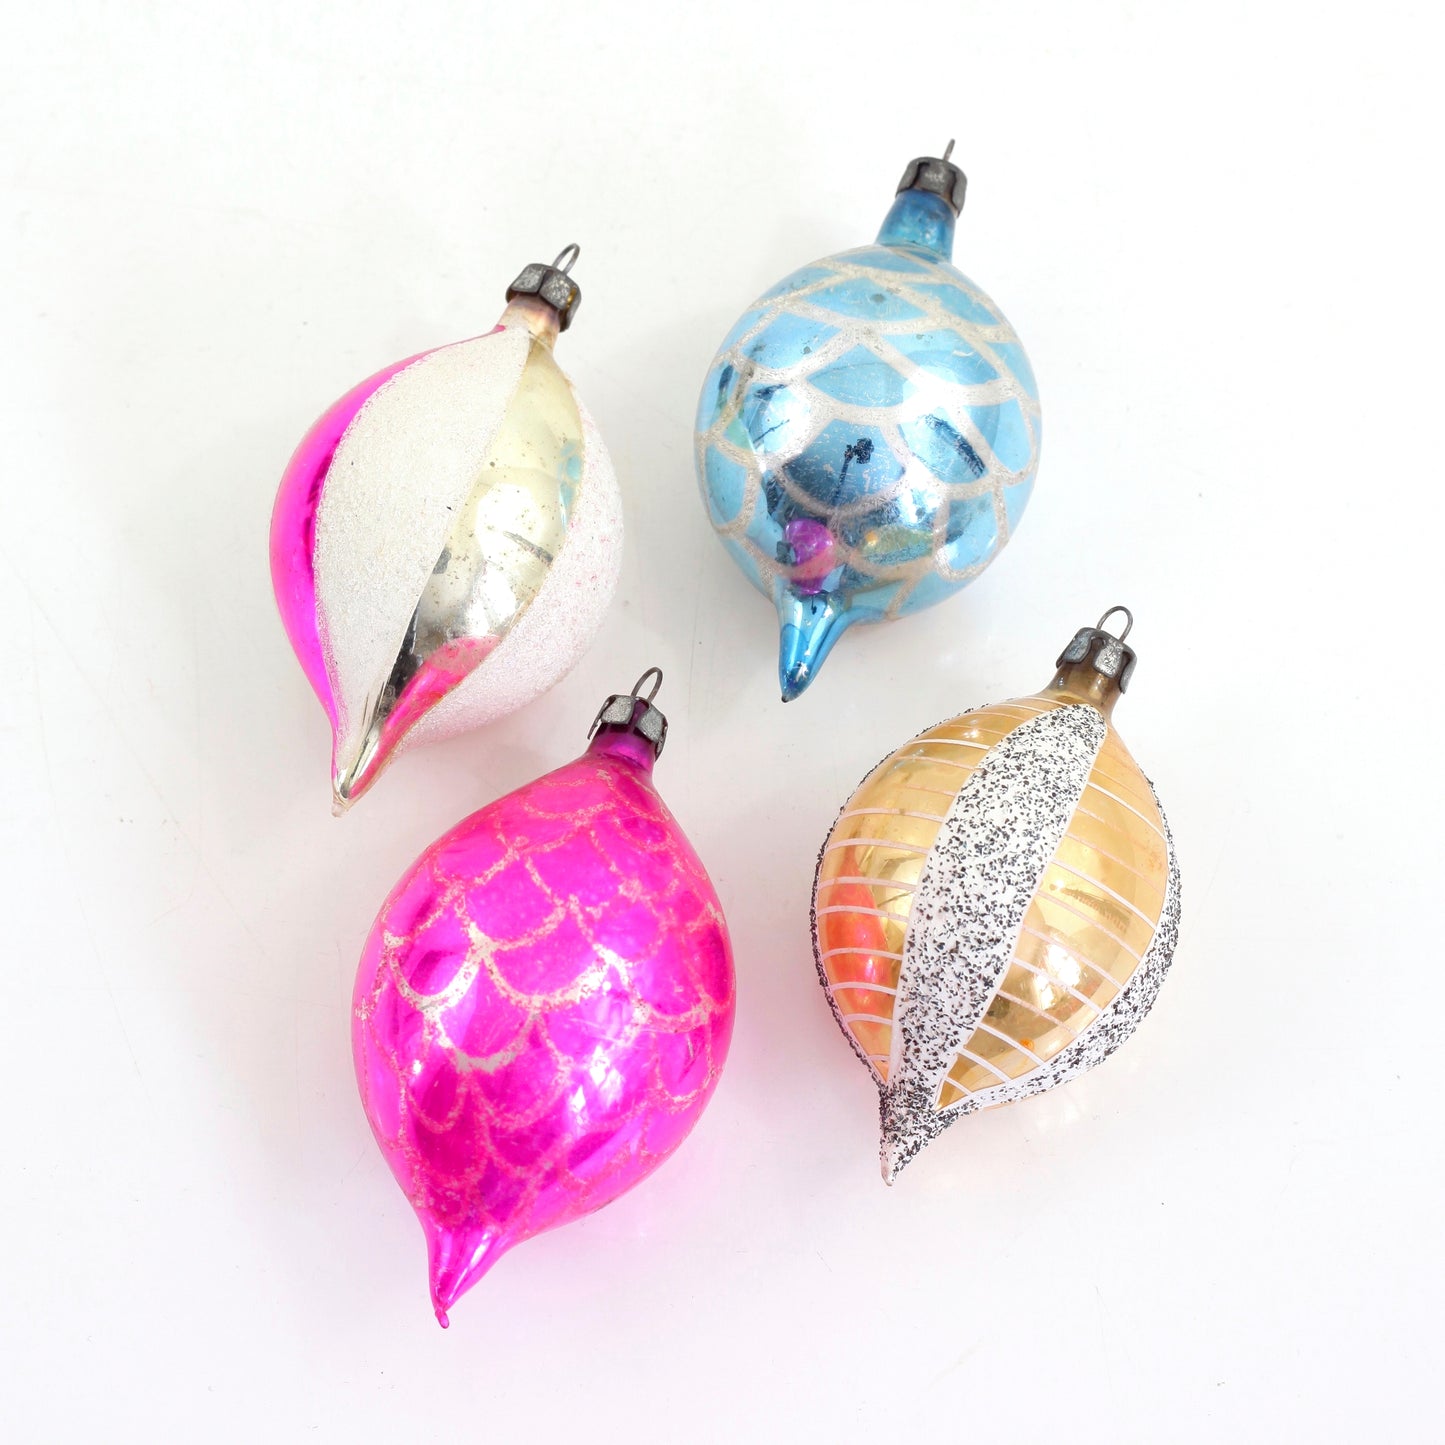 SOLD - Mid Century Mercury Glass Ornaments from Poland